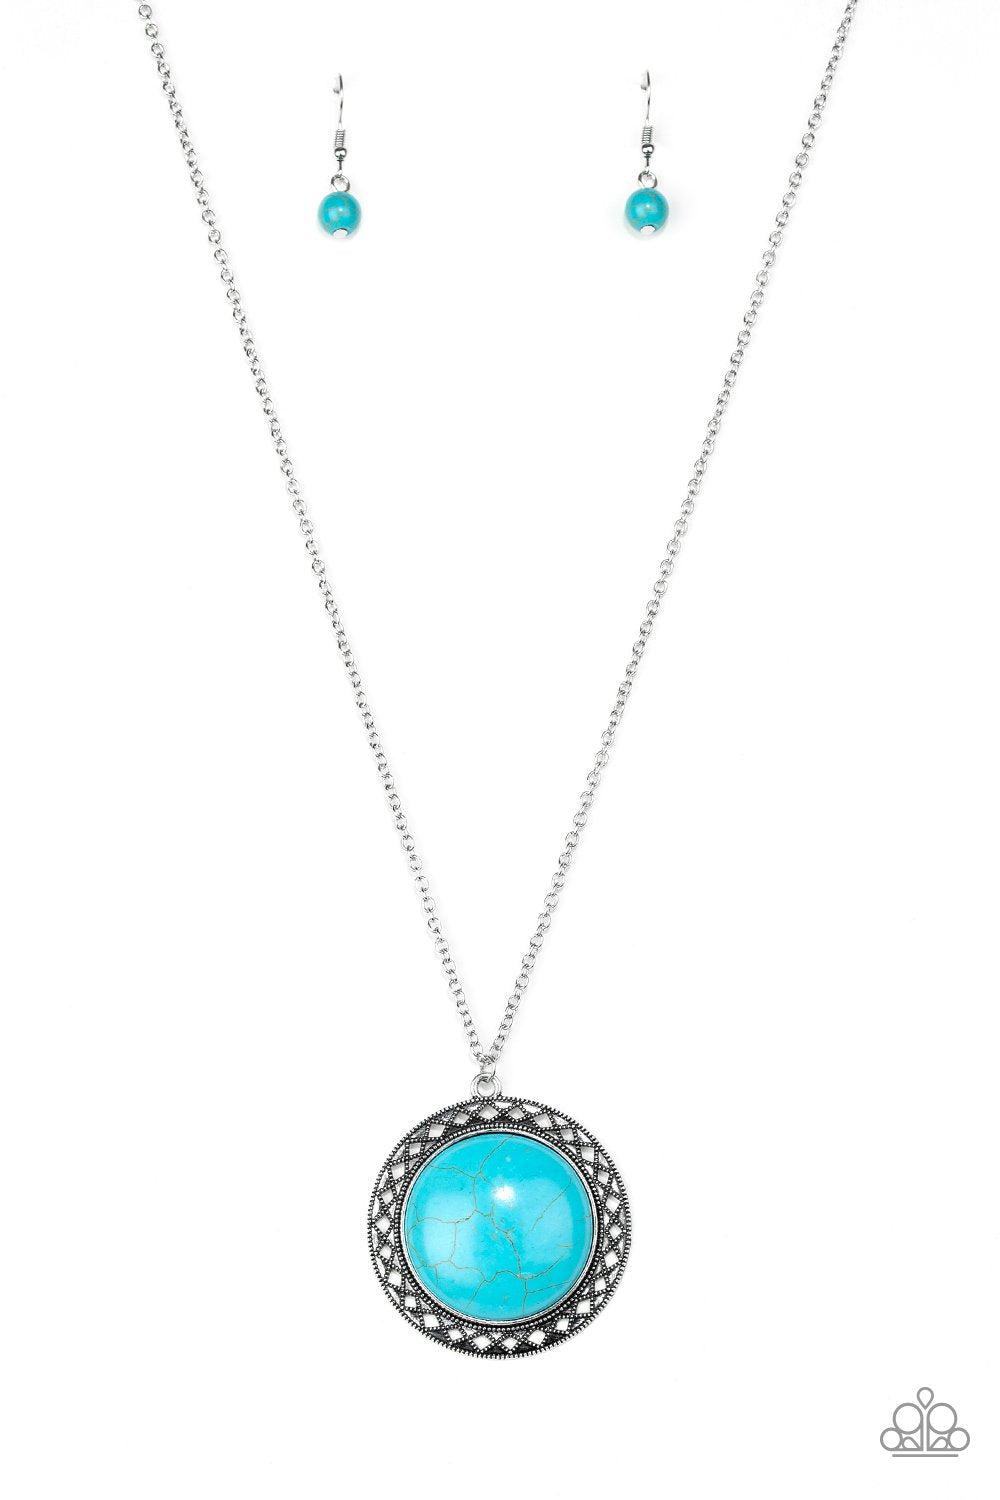 Run Out Of RODEO Turquoise Blue Stone Necklace - Paparazzi Accessories- lightbox - CarasShop.com - $5 Jewelry by Cara Jewels